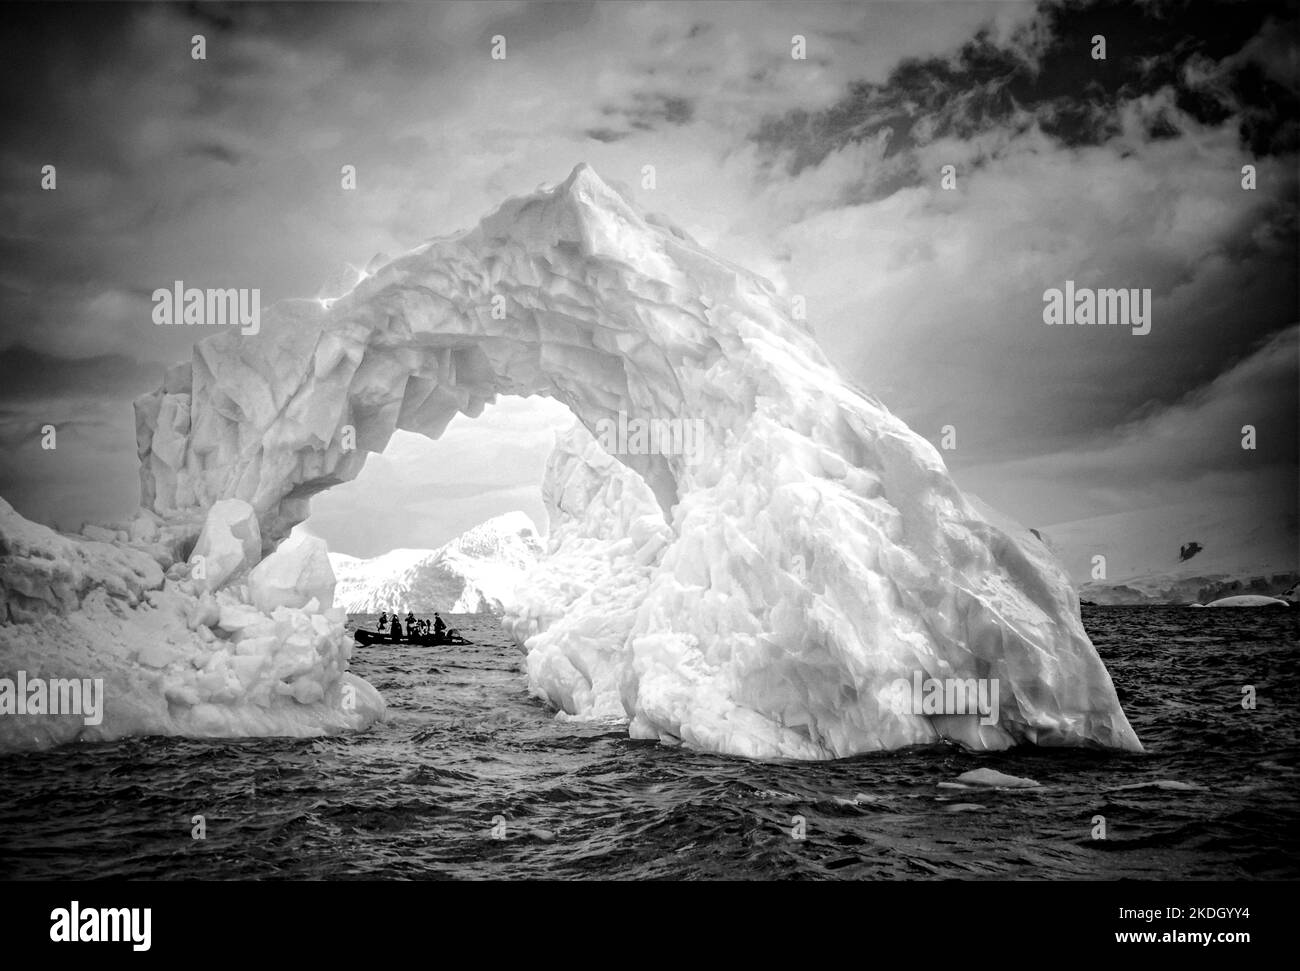 An iceberg of blue ice in Antarctica with an interesting hole / arch shape Stock Photo